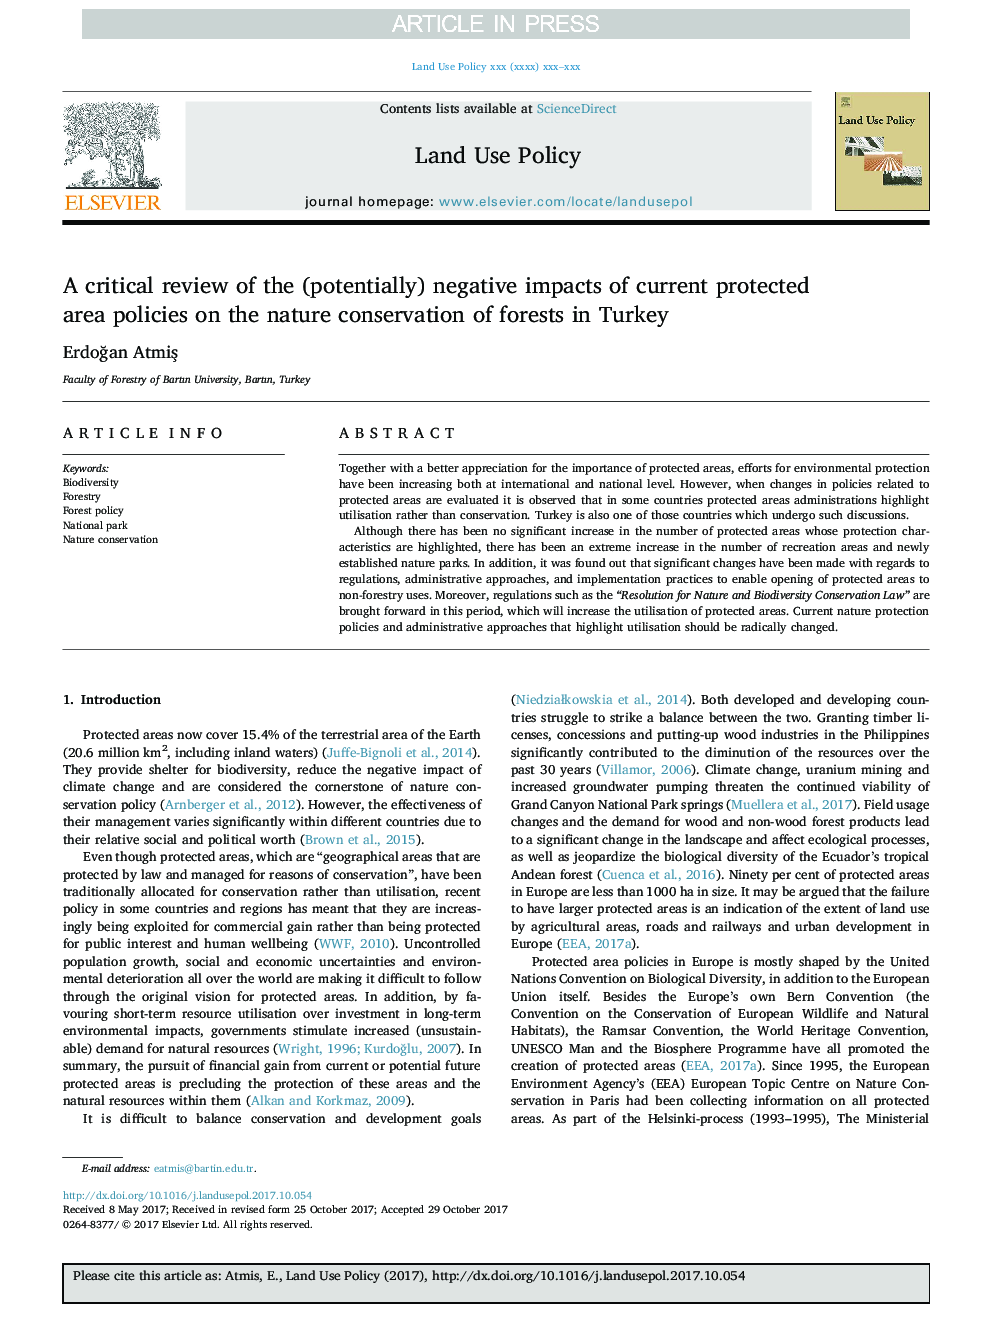 A critical review of the (potentially) negative impacts of current protected area policies on the nature conservation of forests in Turkey